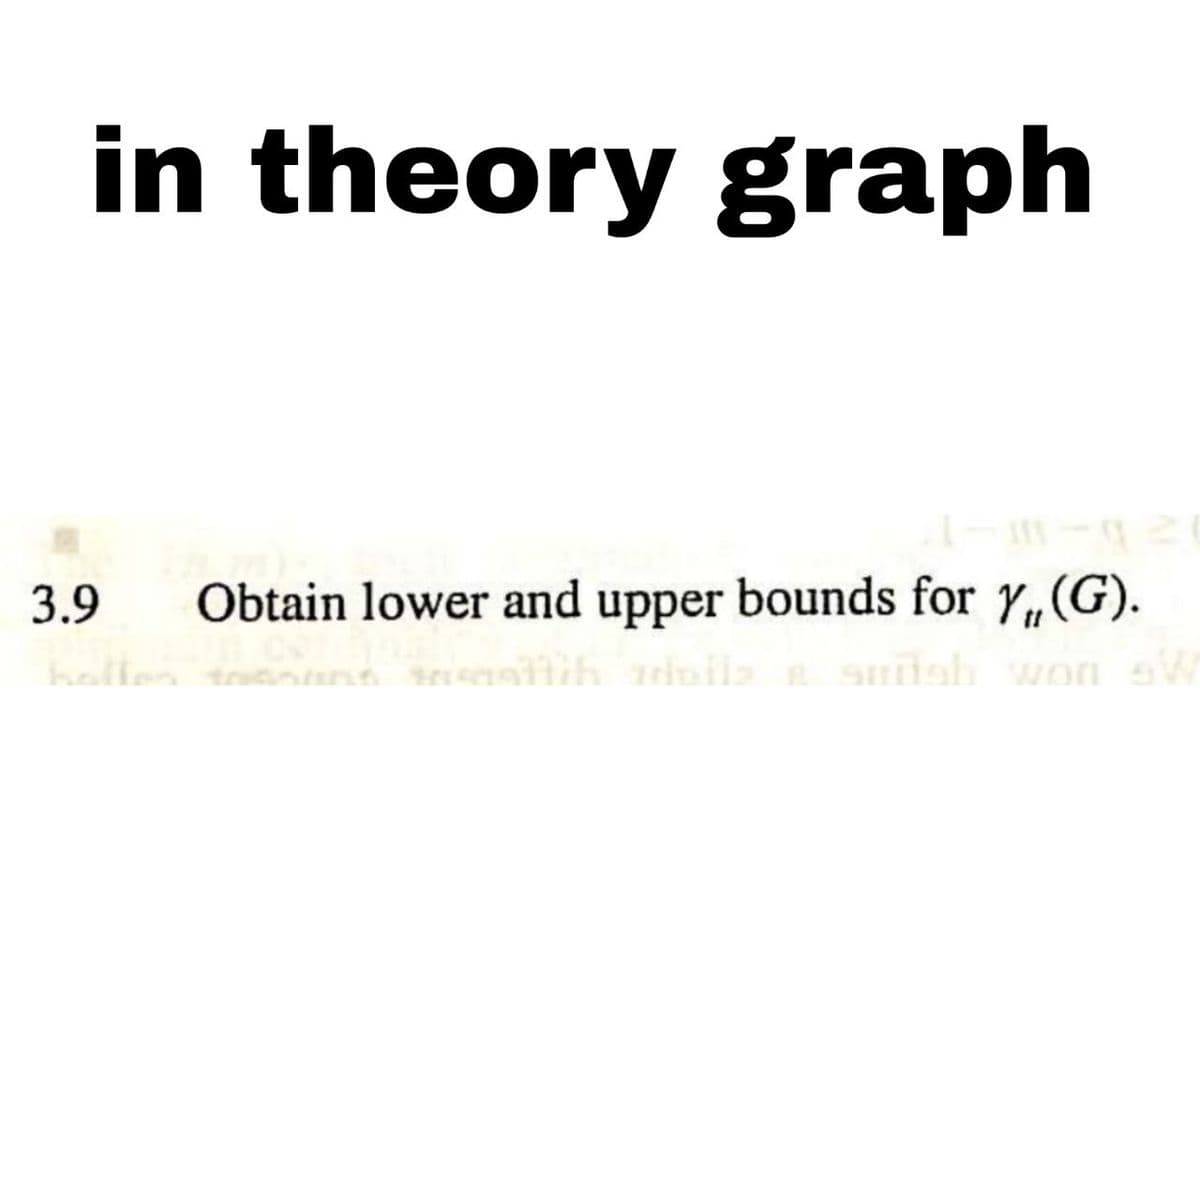 in theory graph
3.9 Obtain lower and upper bounds for Y₁, (G).
Em